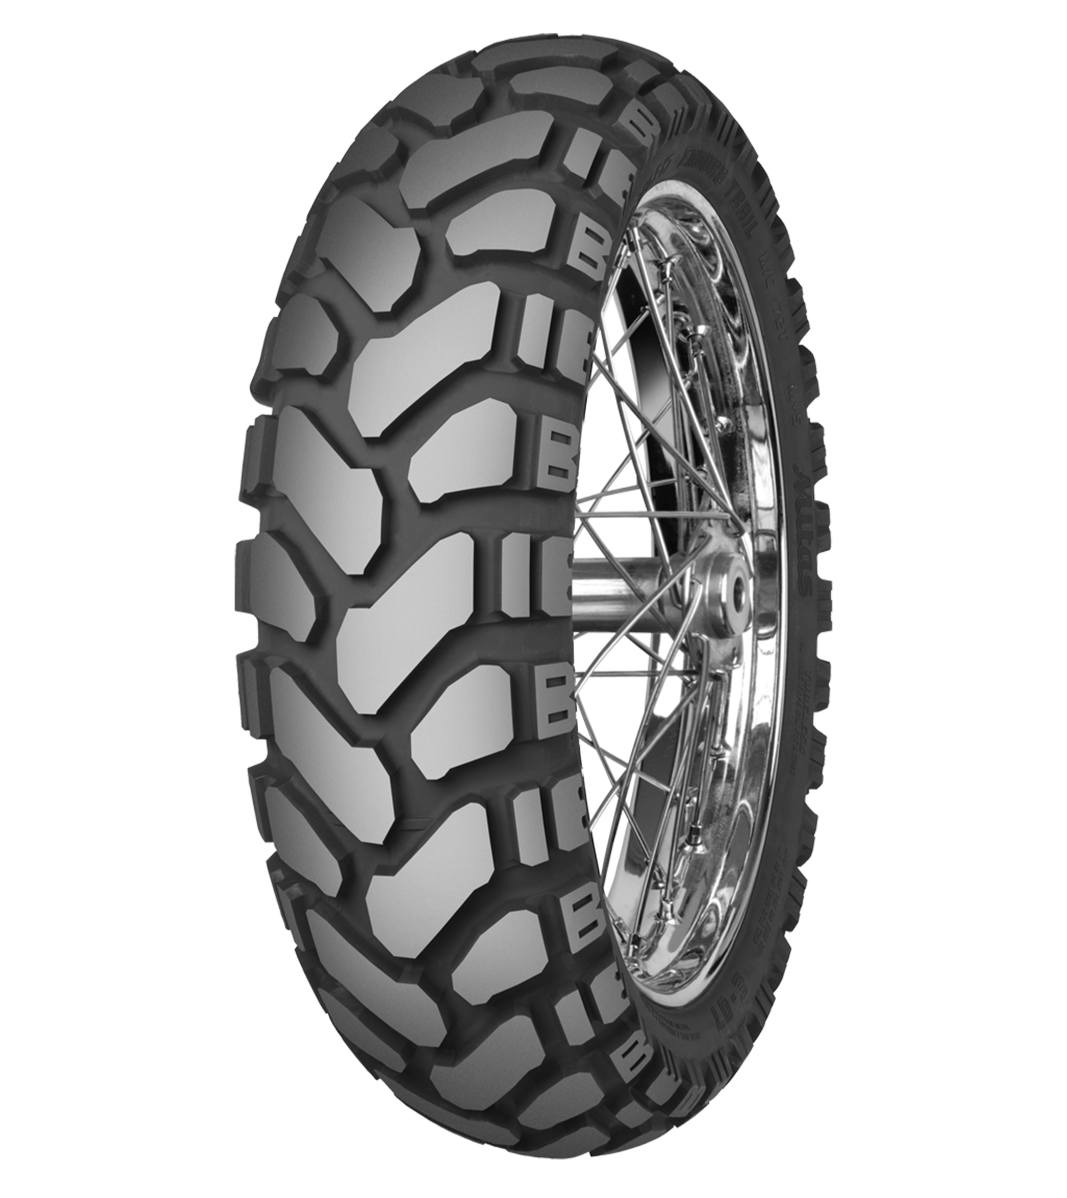 Mitas E-07+ ENDURO TRAIL 150/70B18 Trail ON Trail 70T No Stripe Tubeless Rear Tire, 224061, 150/70B18, Adventure Touring, E Series, E-07+ Enduro Trail, Rear, Trail, Trail ON, Tires - Imported and distributed in North & South America by Lindeco Genuine Powersports - Premier Powersports Equipment and Accessories for Motorcycle Enthusiasts, Professional Riders and Dealers.